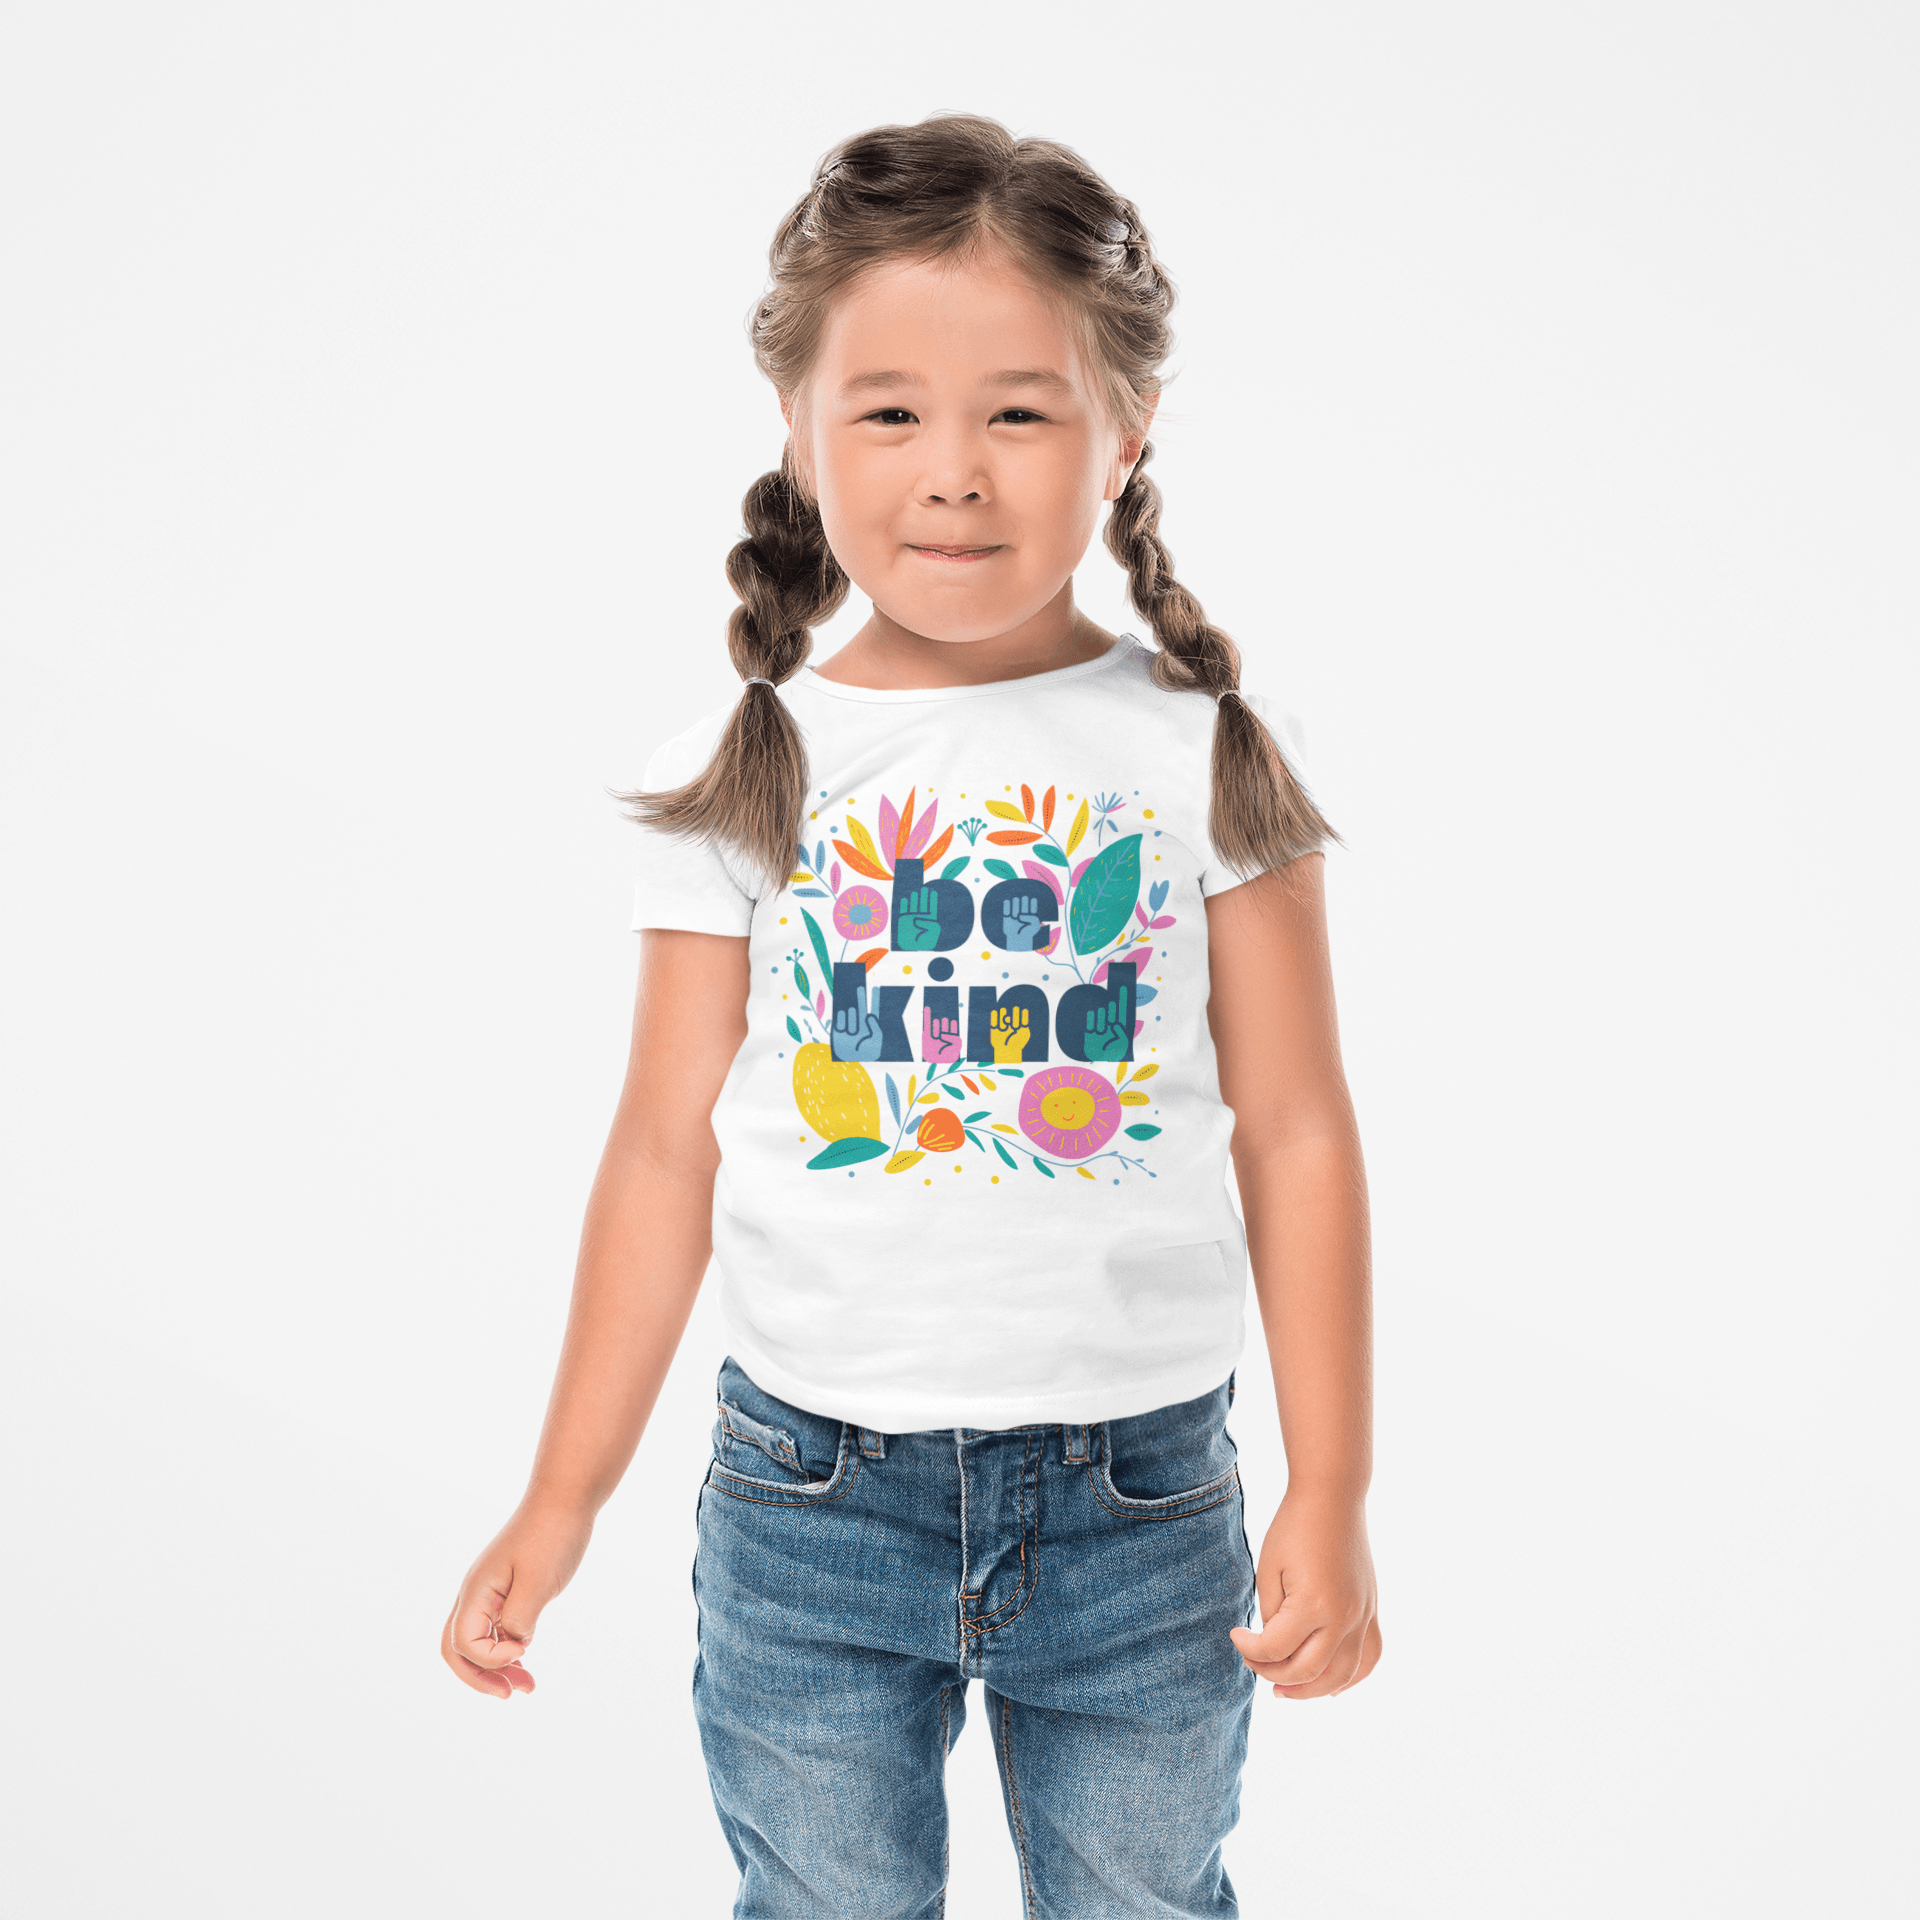 Be Kind Floral Toddler Unisex Fit Tee - The Kindness Cause